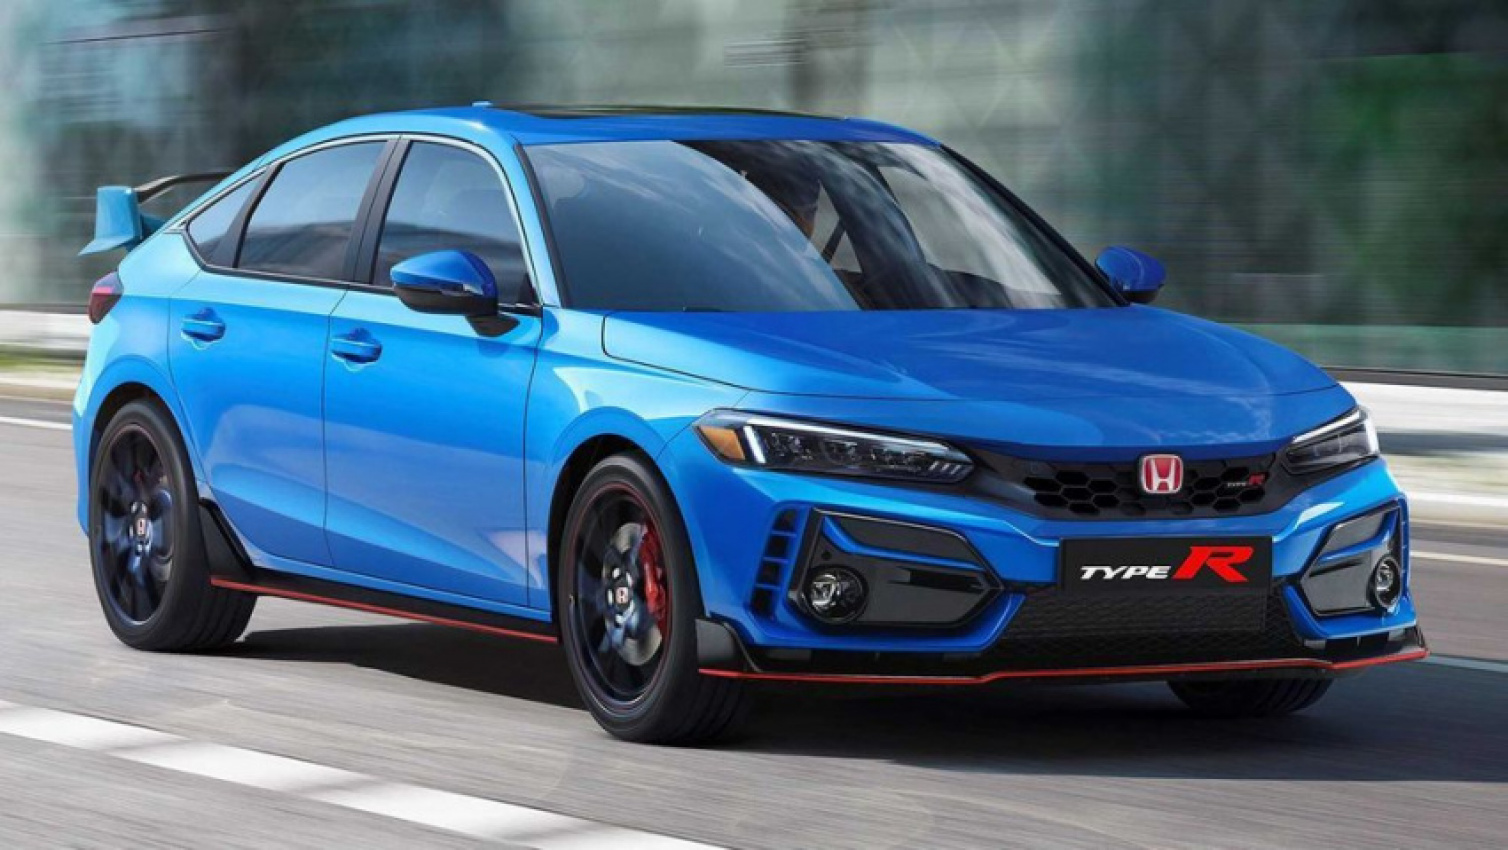 autos, cars, auto news, civic hatch 2022, civic type r, honda, honda civic type r 2022, type r, 2022 civic type r comes to life through rendering